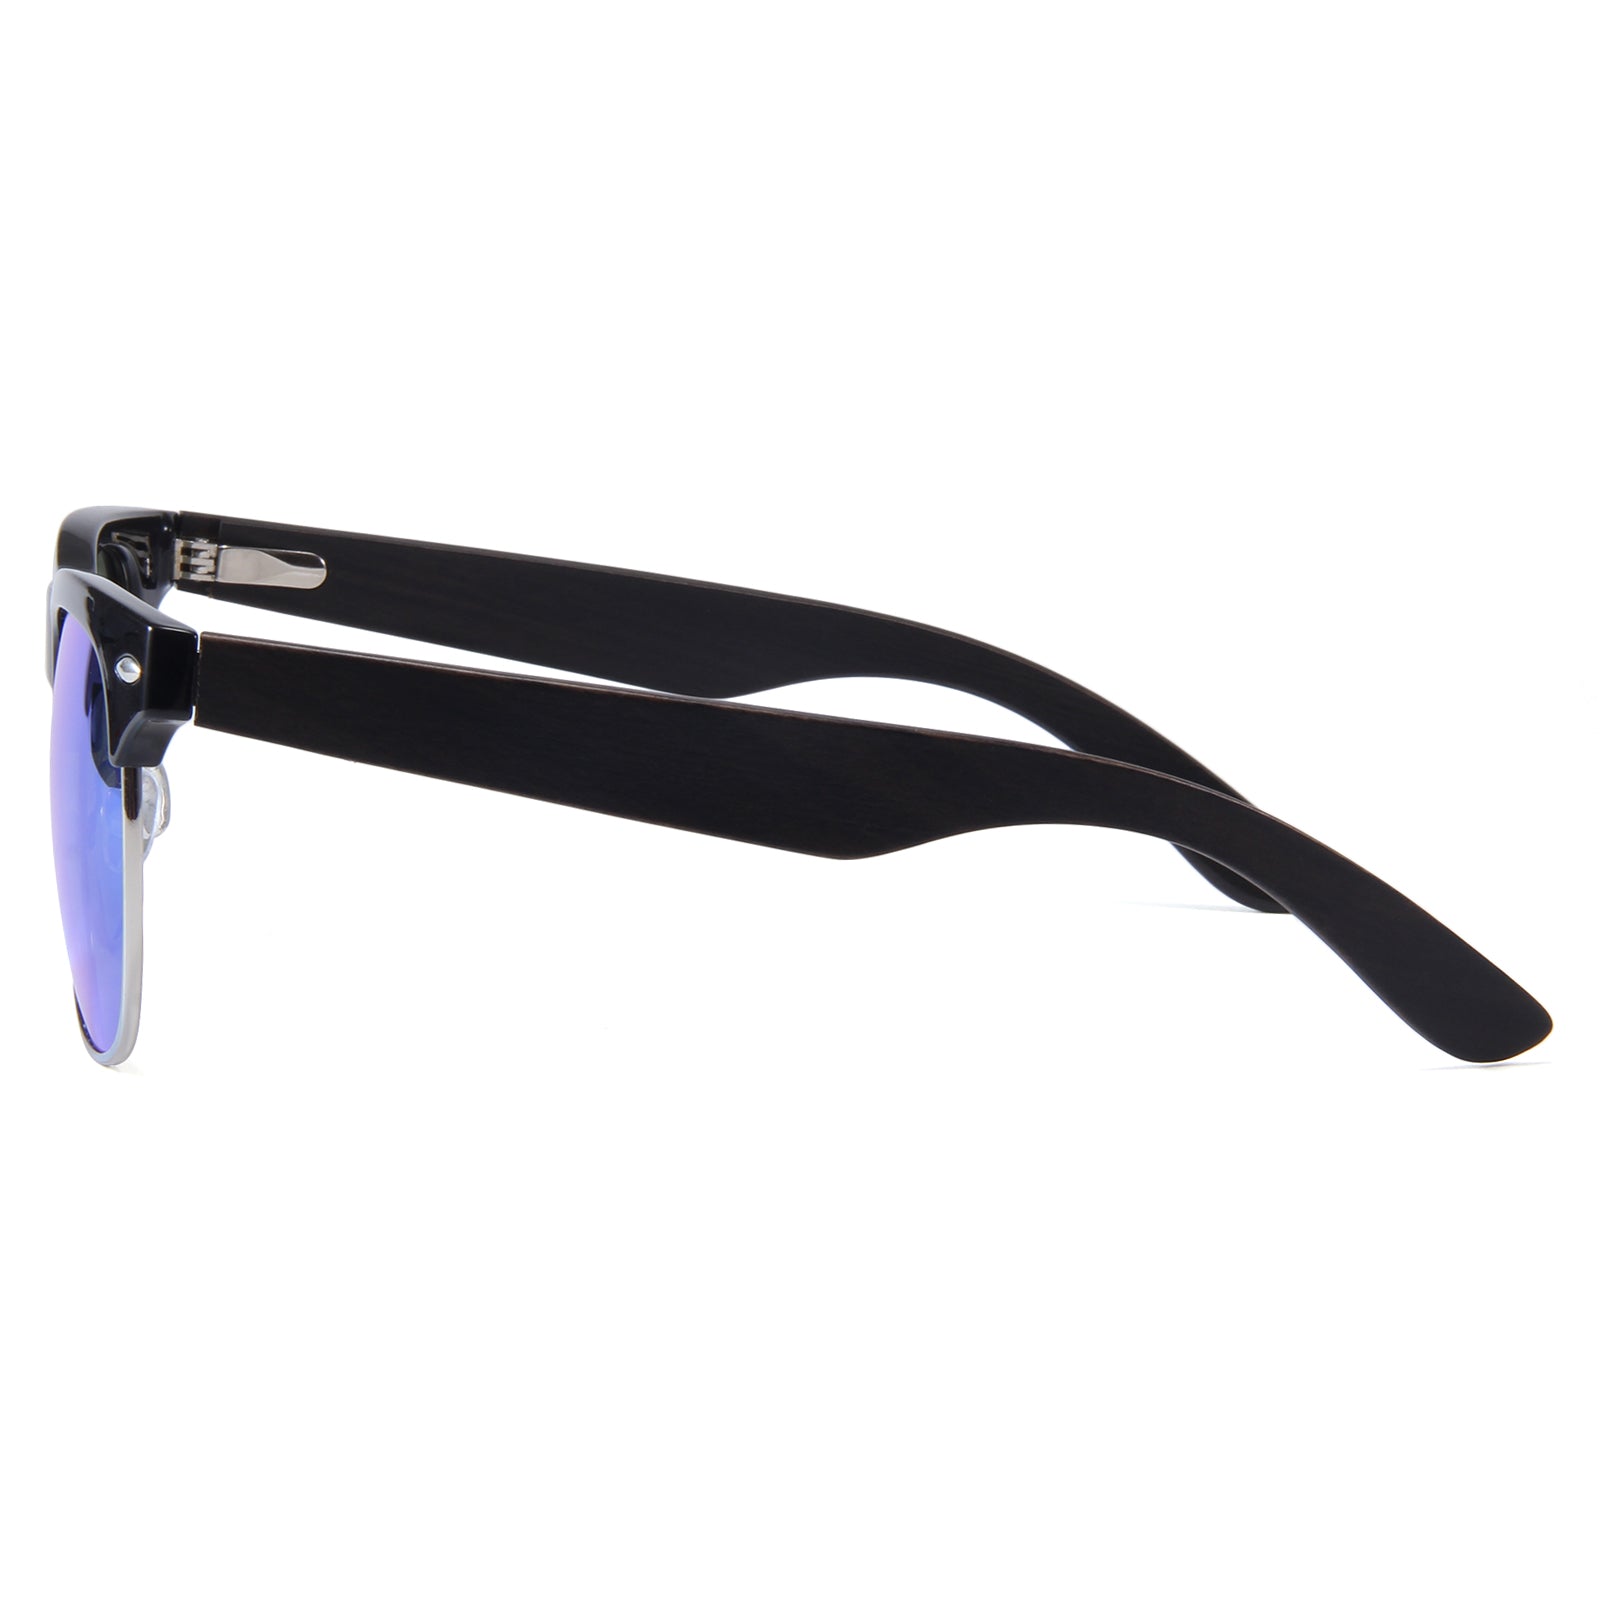 Newham - 03 - Blue Mirror Polarized Lens with Black Case